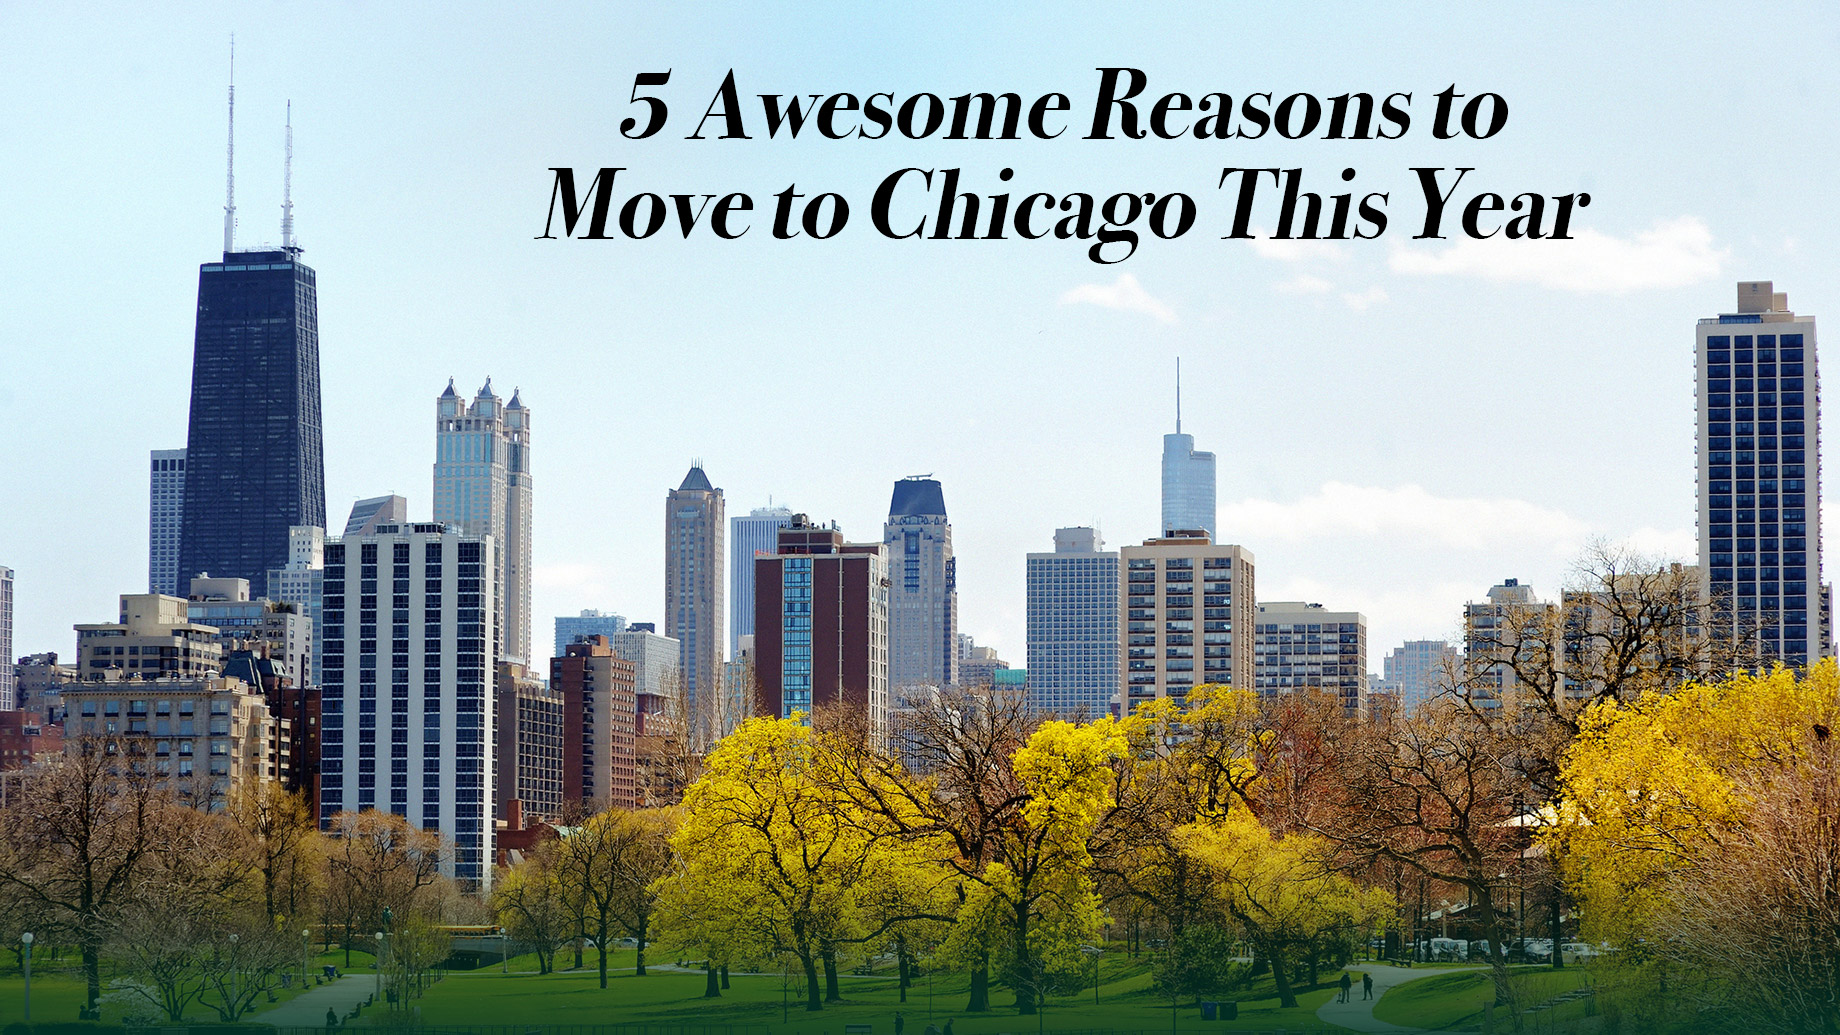 5 Awesome Reasons to Move to Chicago This Year